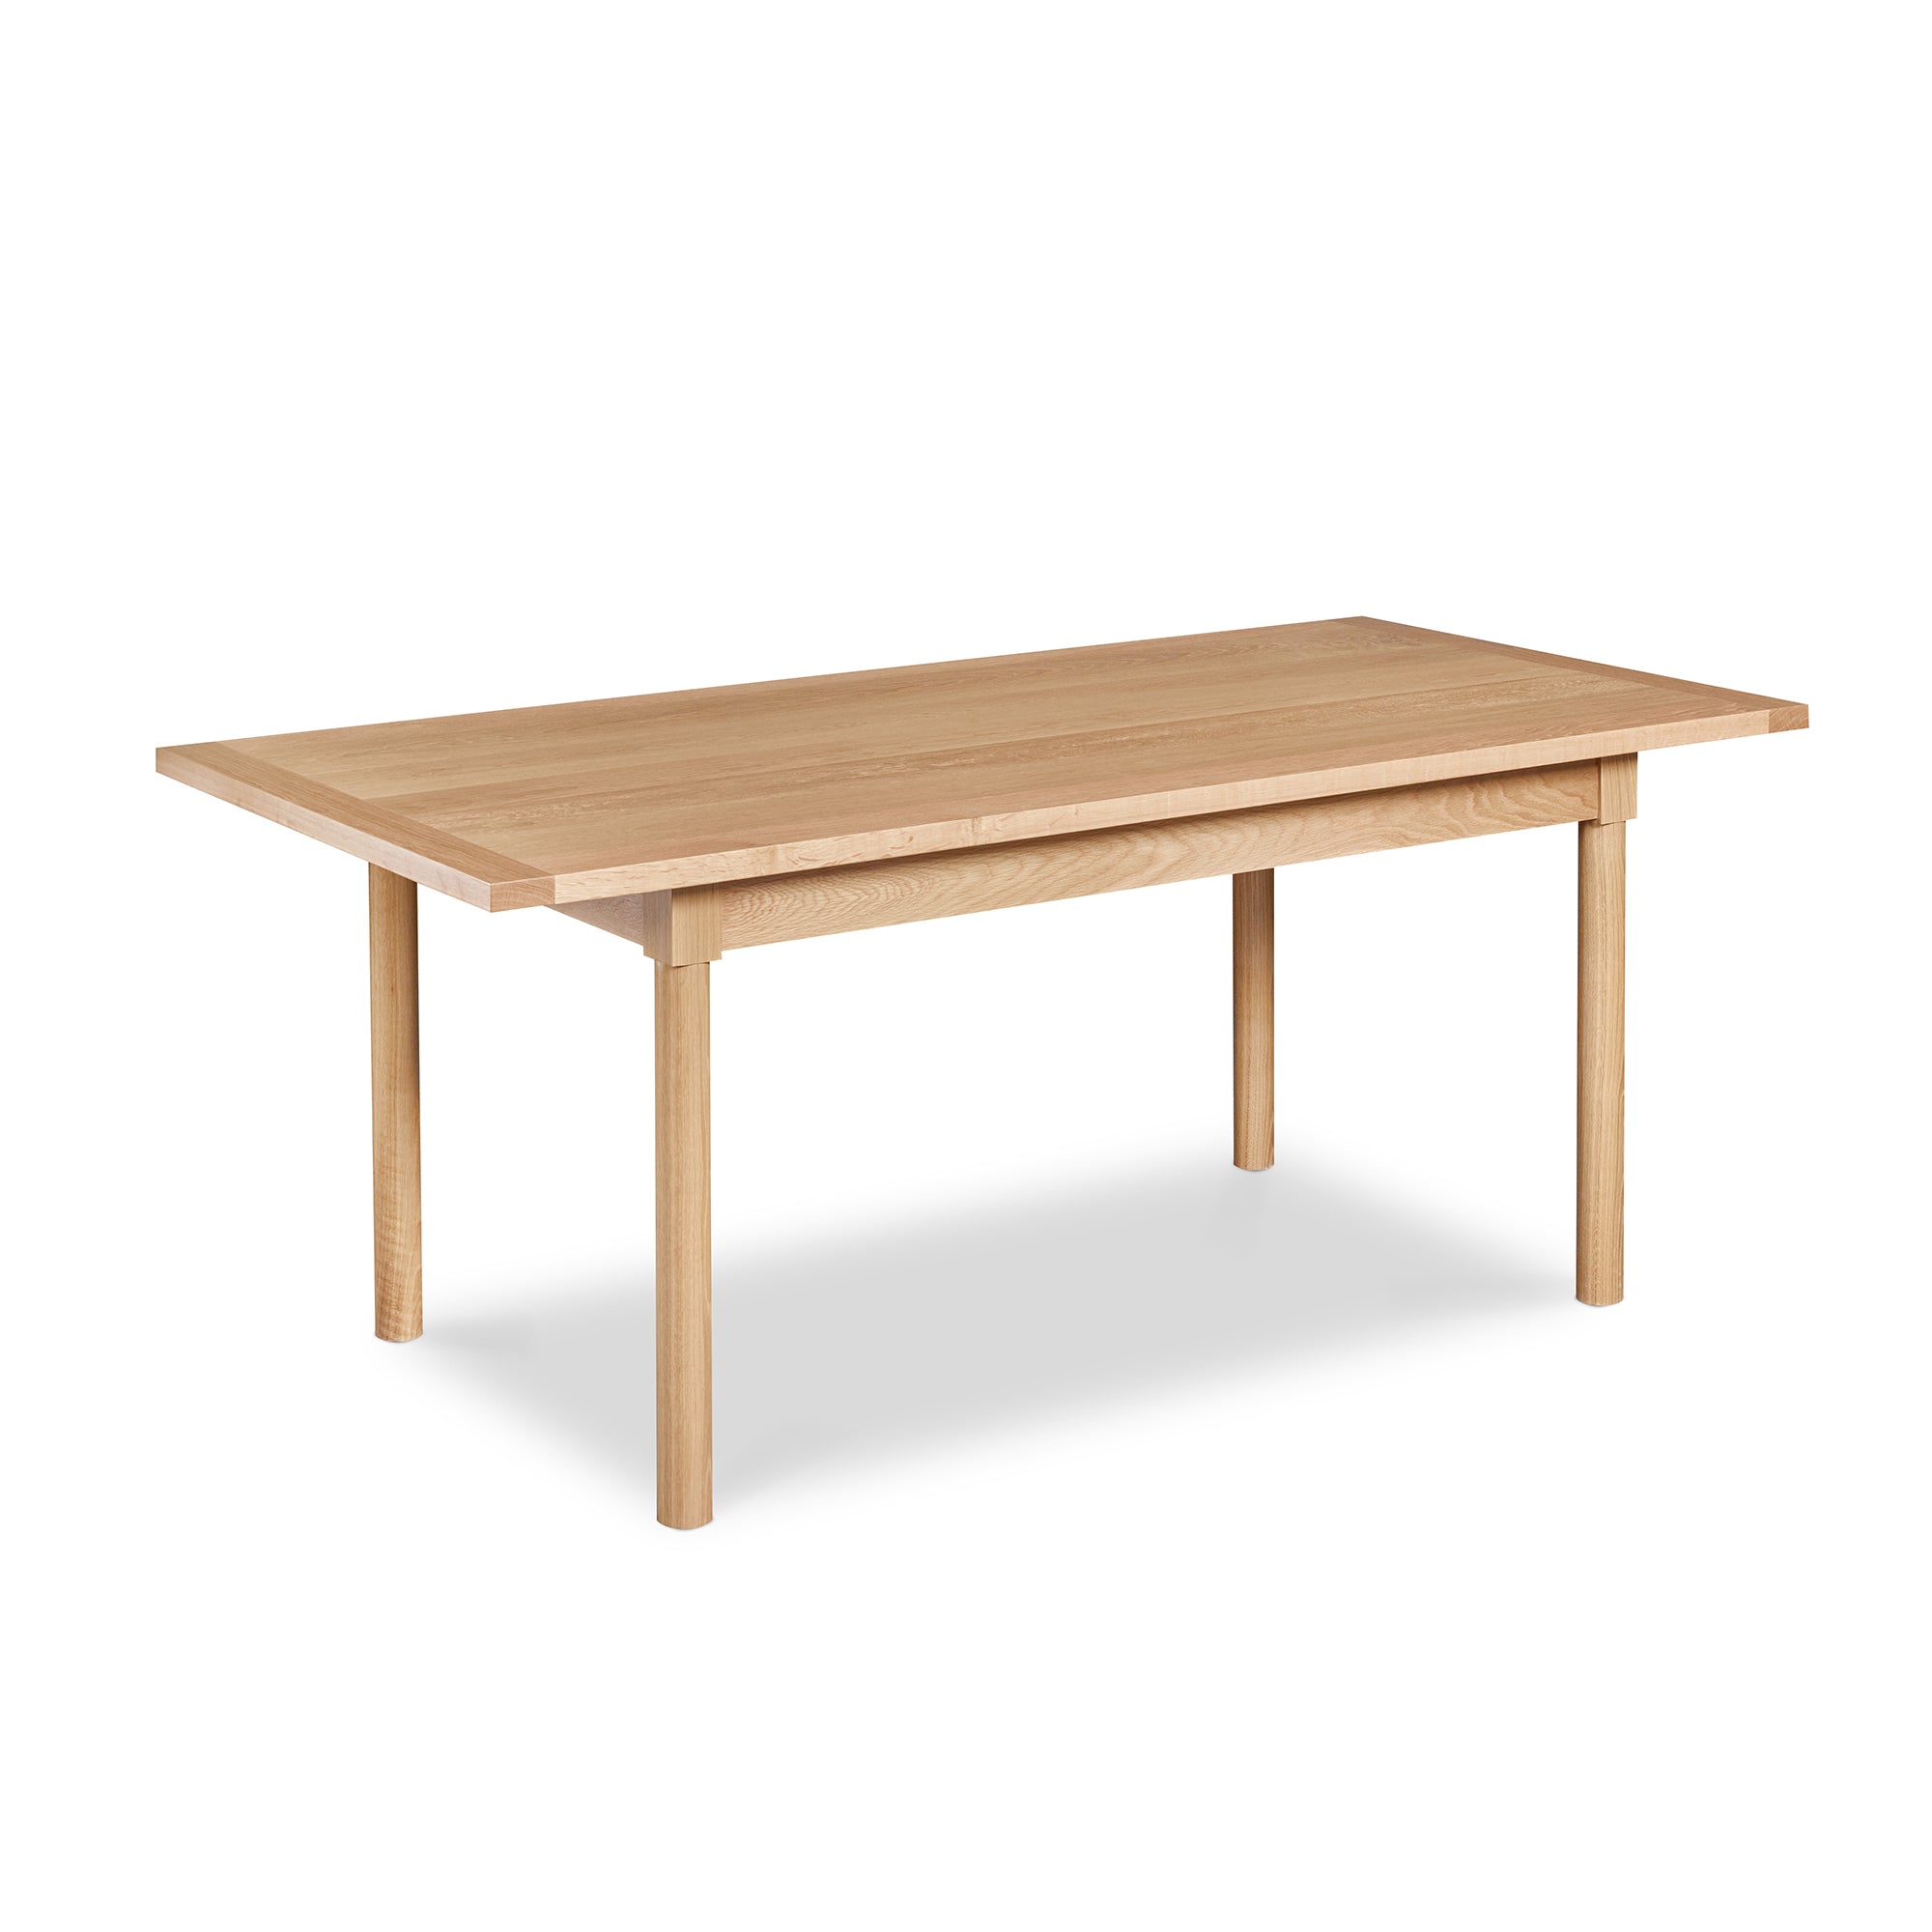 White Oak Tabletops with Breadboard Ends - 2 Thick